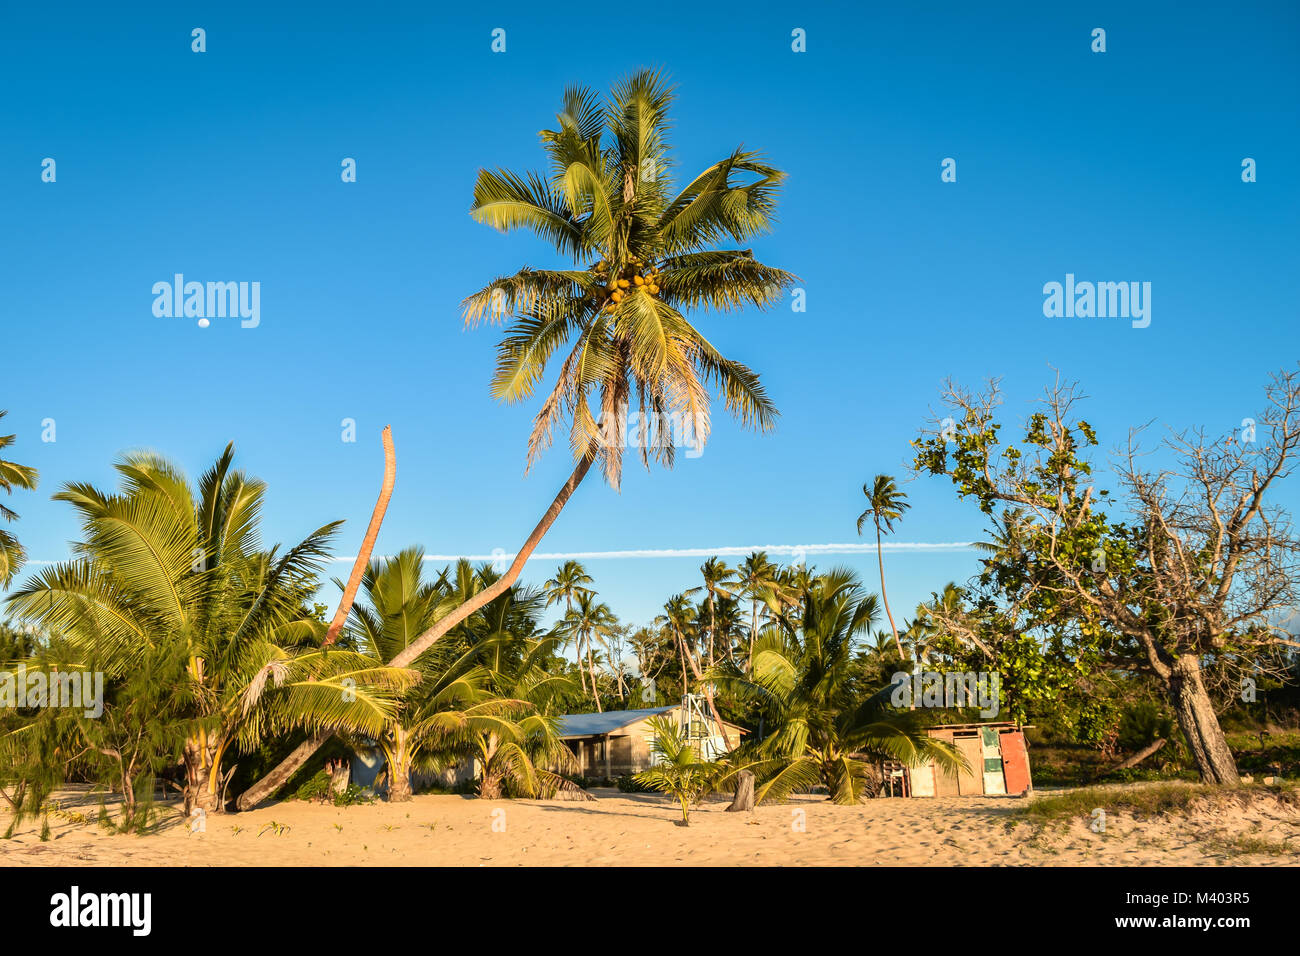 Full moon behind a coconut palm on a tropical beach in Uoleva, Tonga Stock Photo